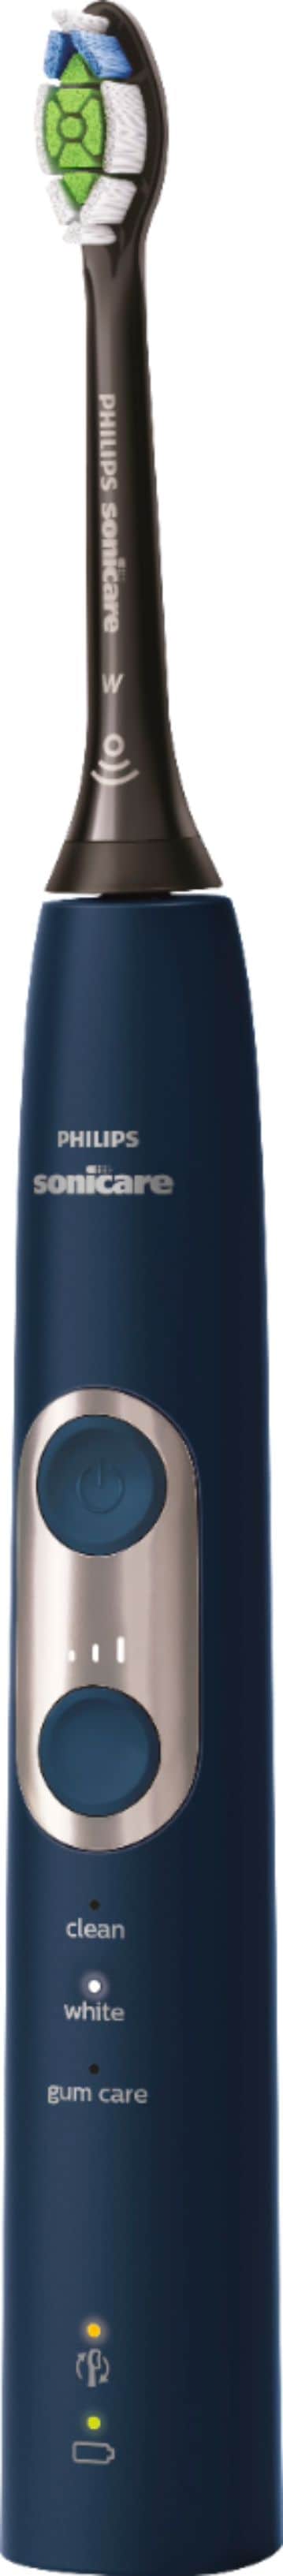 Philips Sonicare - ProtectiveClean 6100 Rechargeable Toothbrush - Navy Blue_0